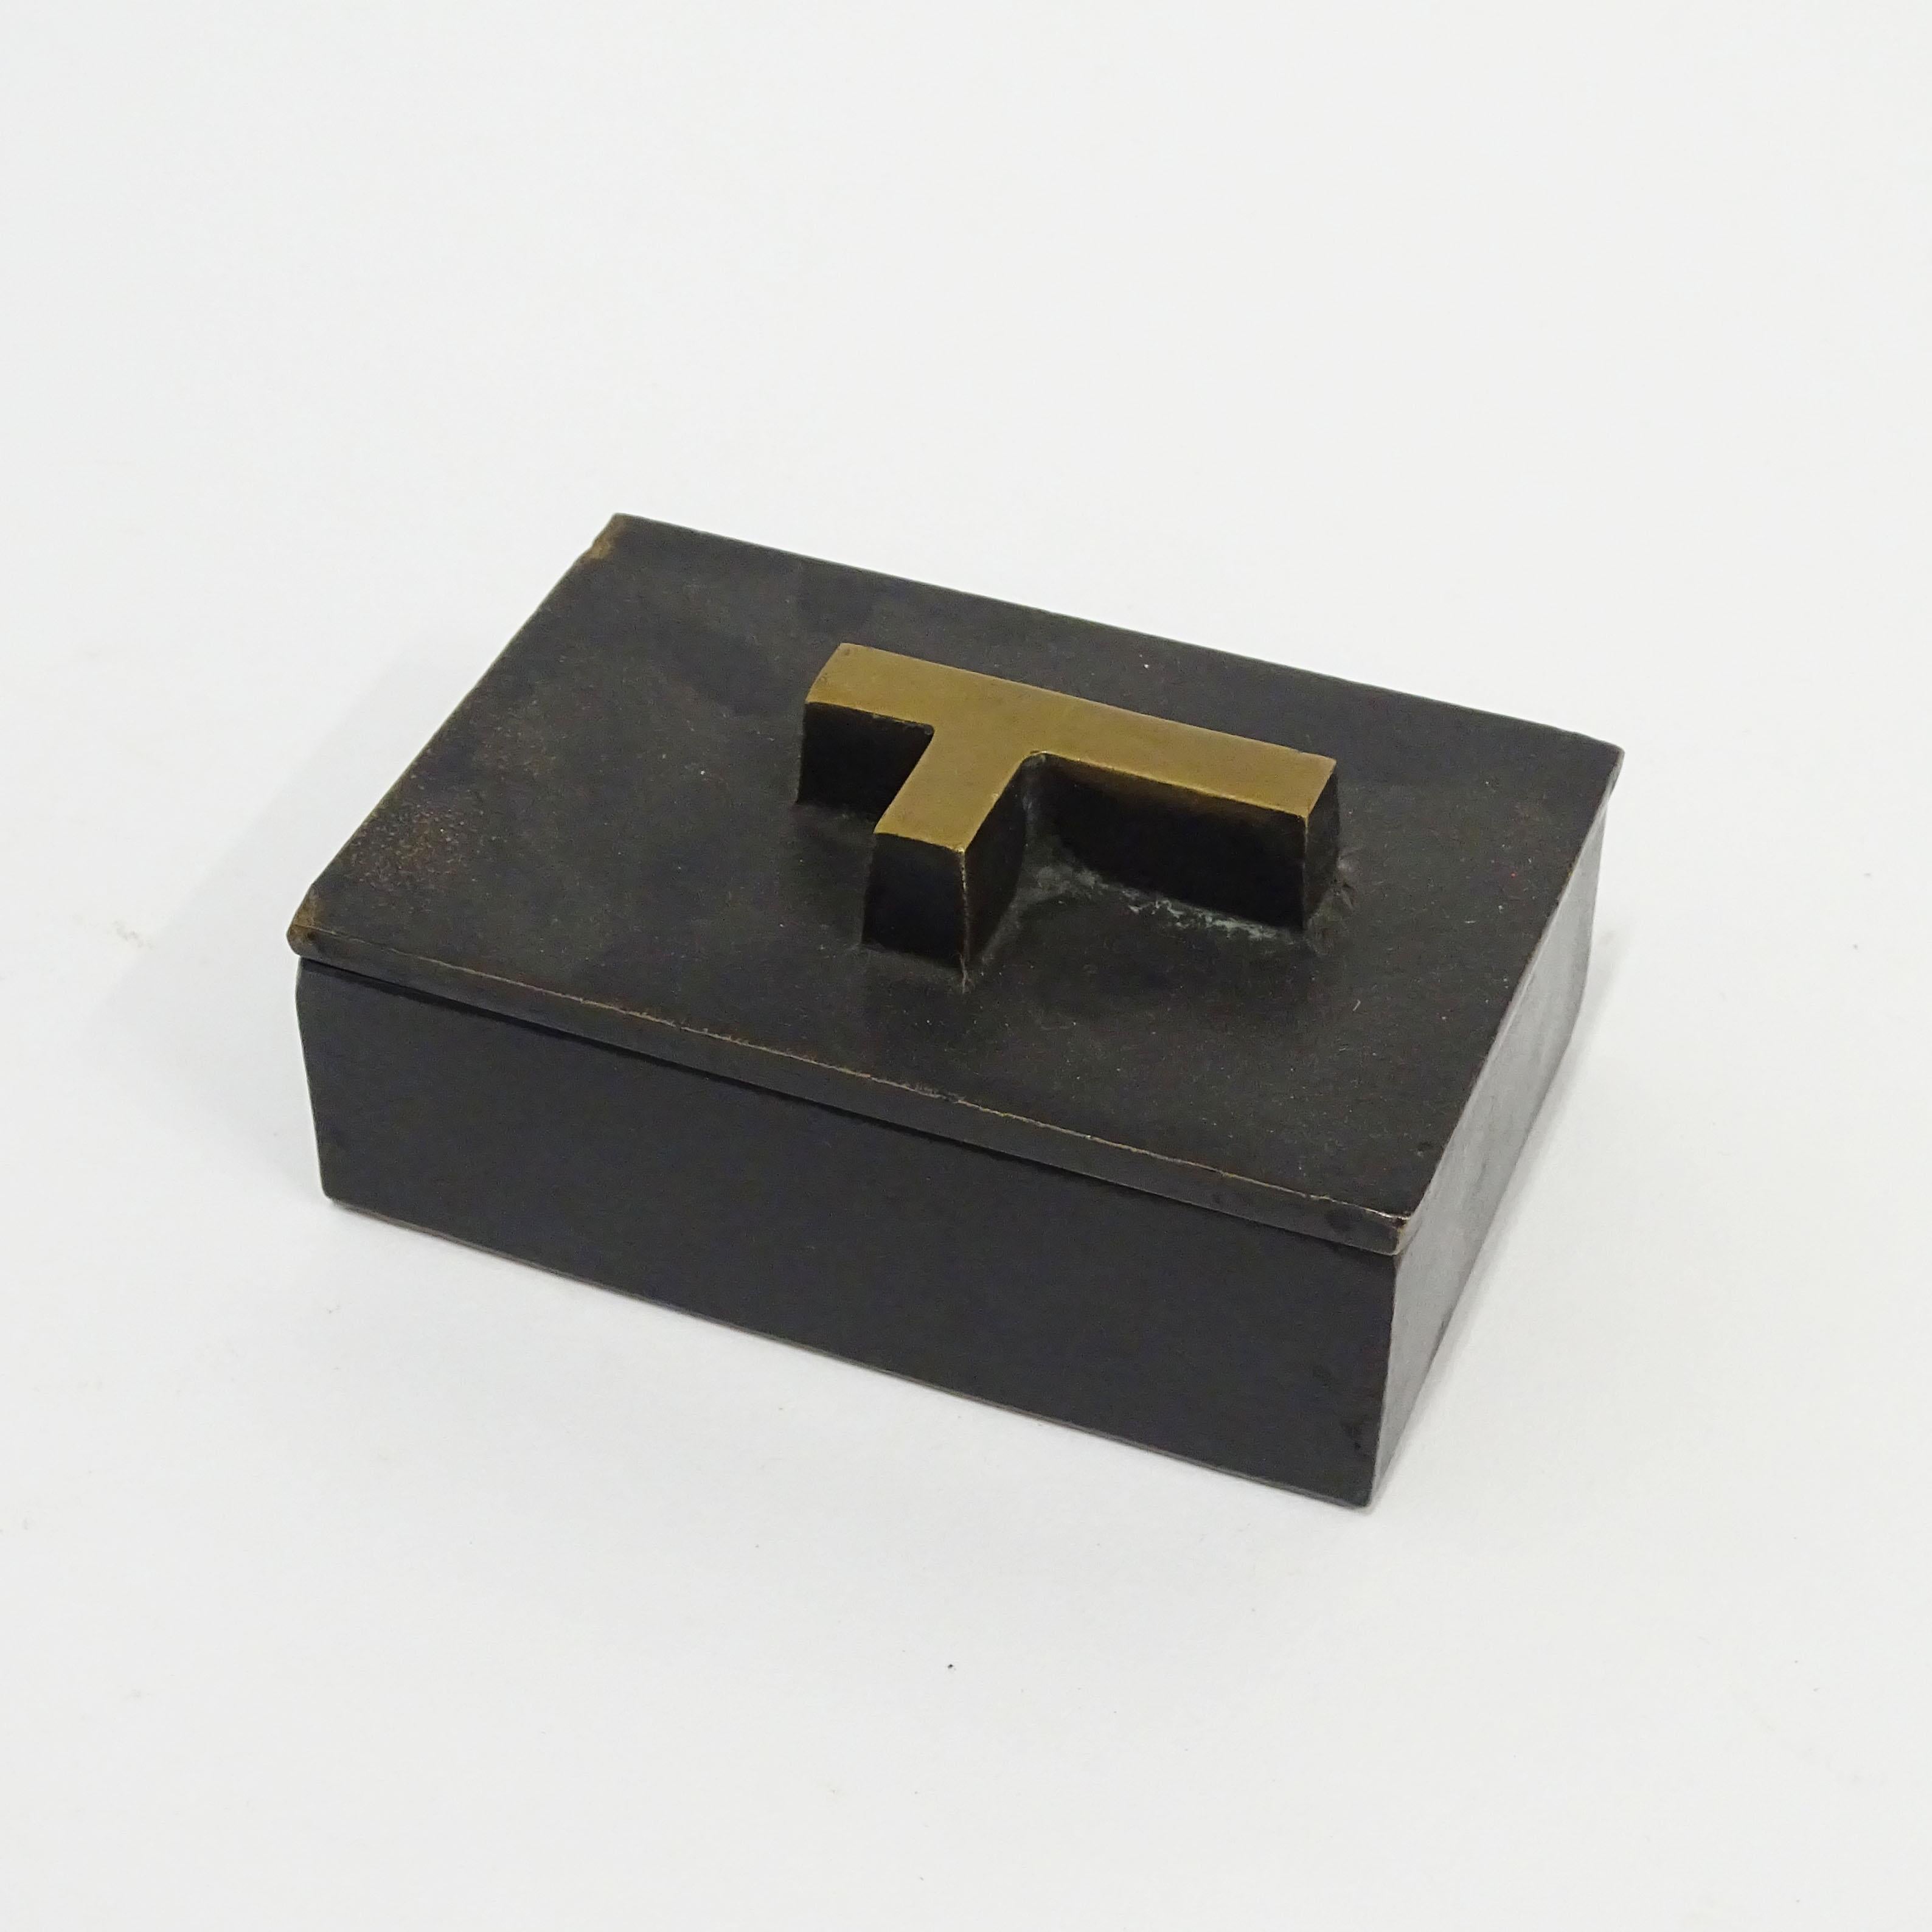 Modern Two Garouste and Bonetti Bronze Boxes for the Collection of Herbert Blome 2001 For Sale